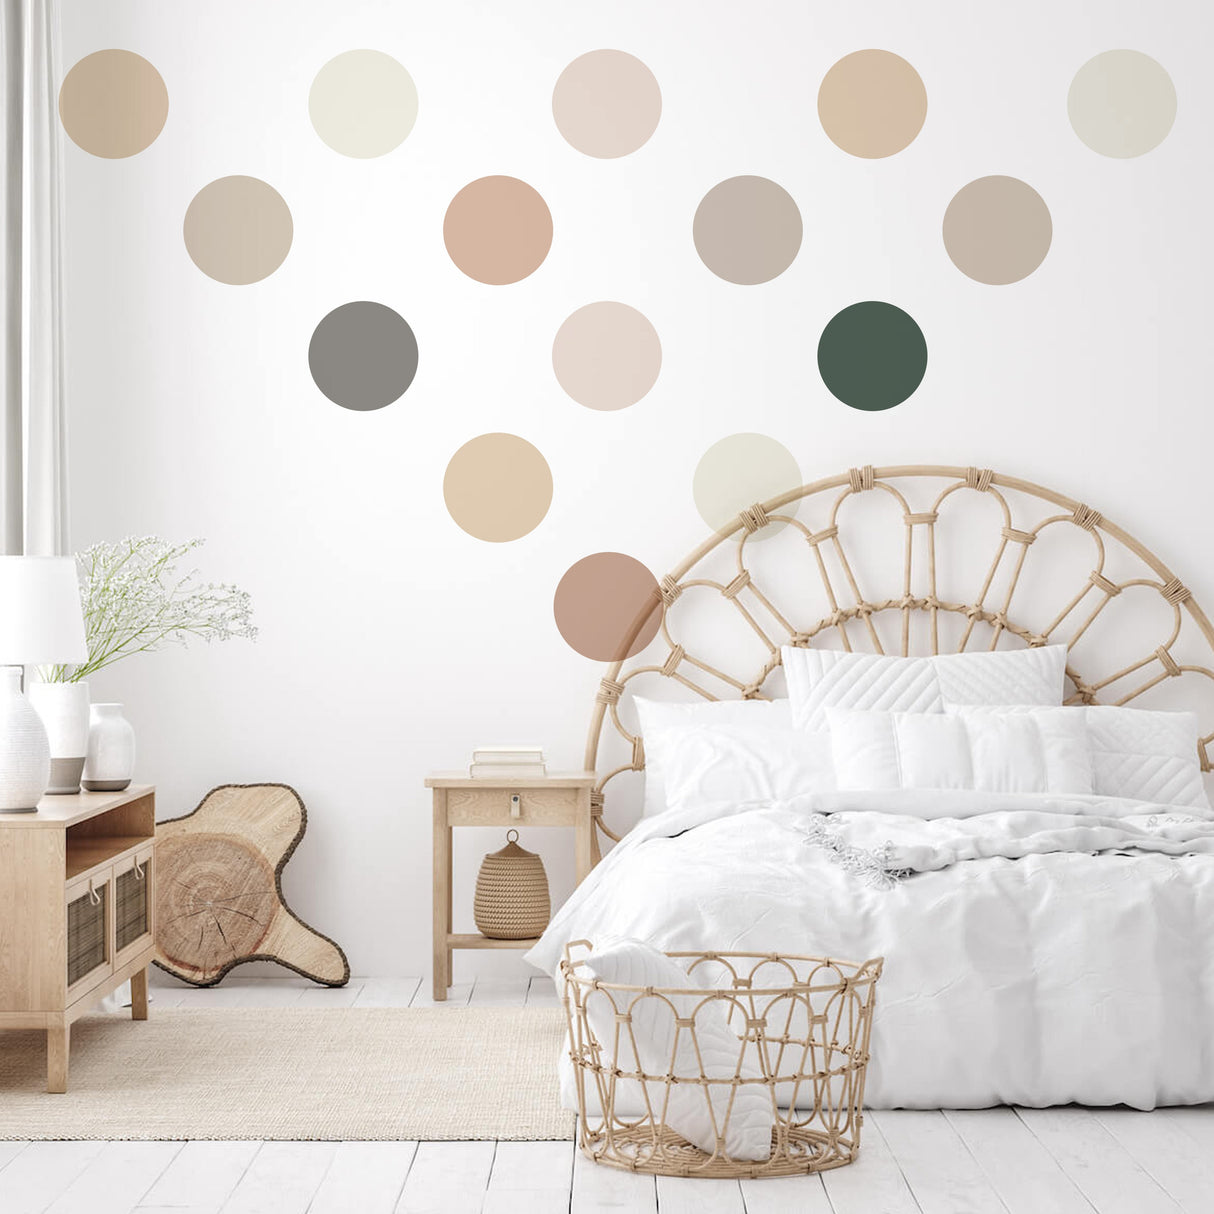 50x Neutral Boho Dots Decals - Nursery Baby Kids Room Pastel Circle Wall Stickers Decor